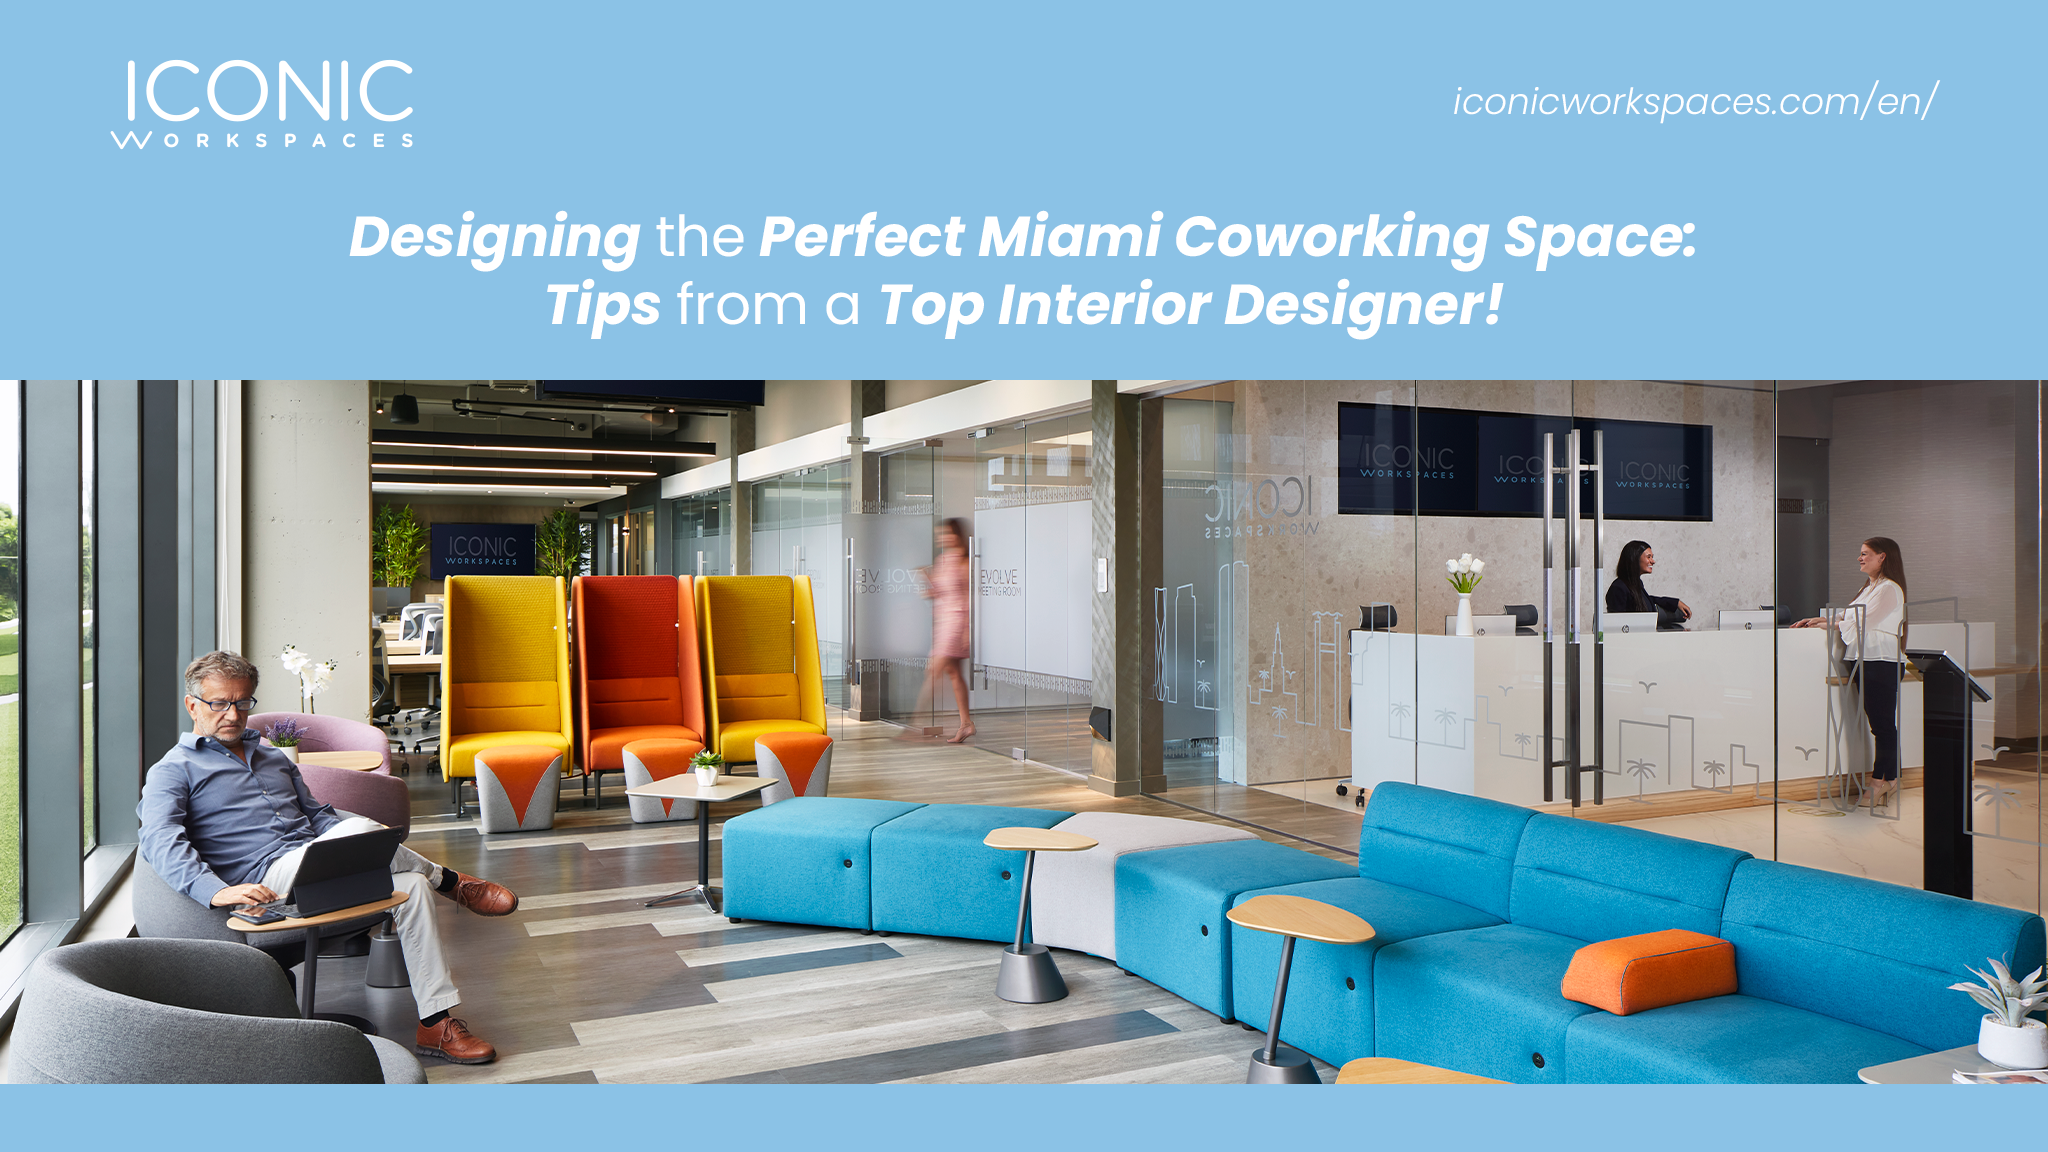 Designing the Perfect Miami Coworking Space: Tips from a Top Interior Designer